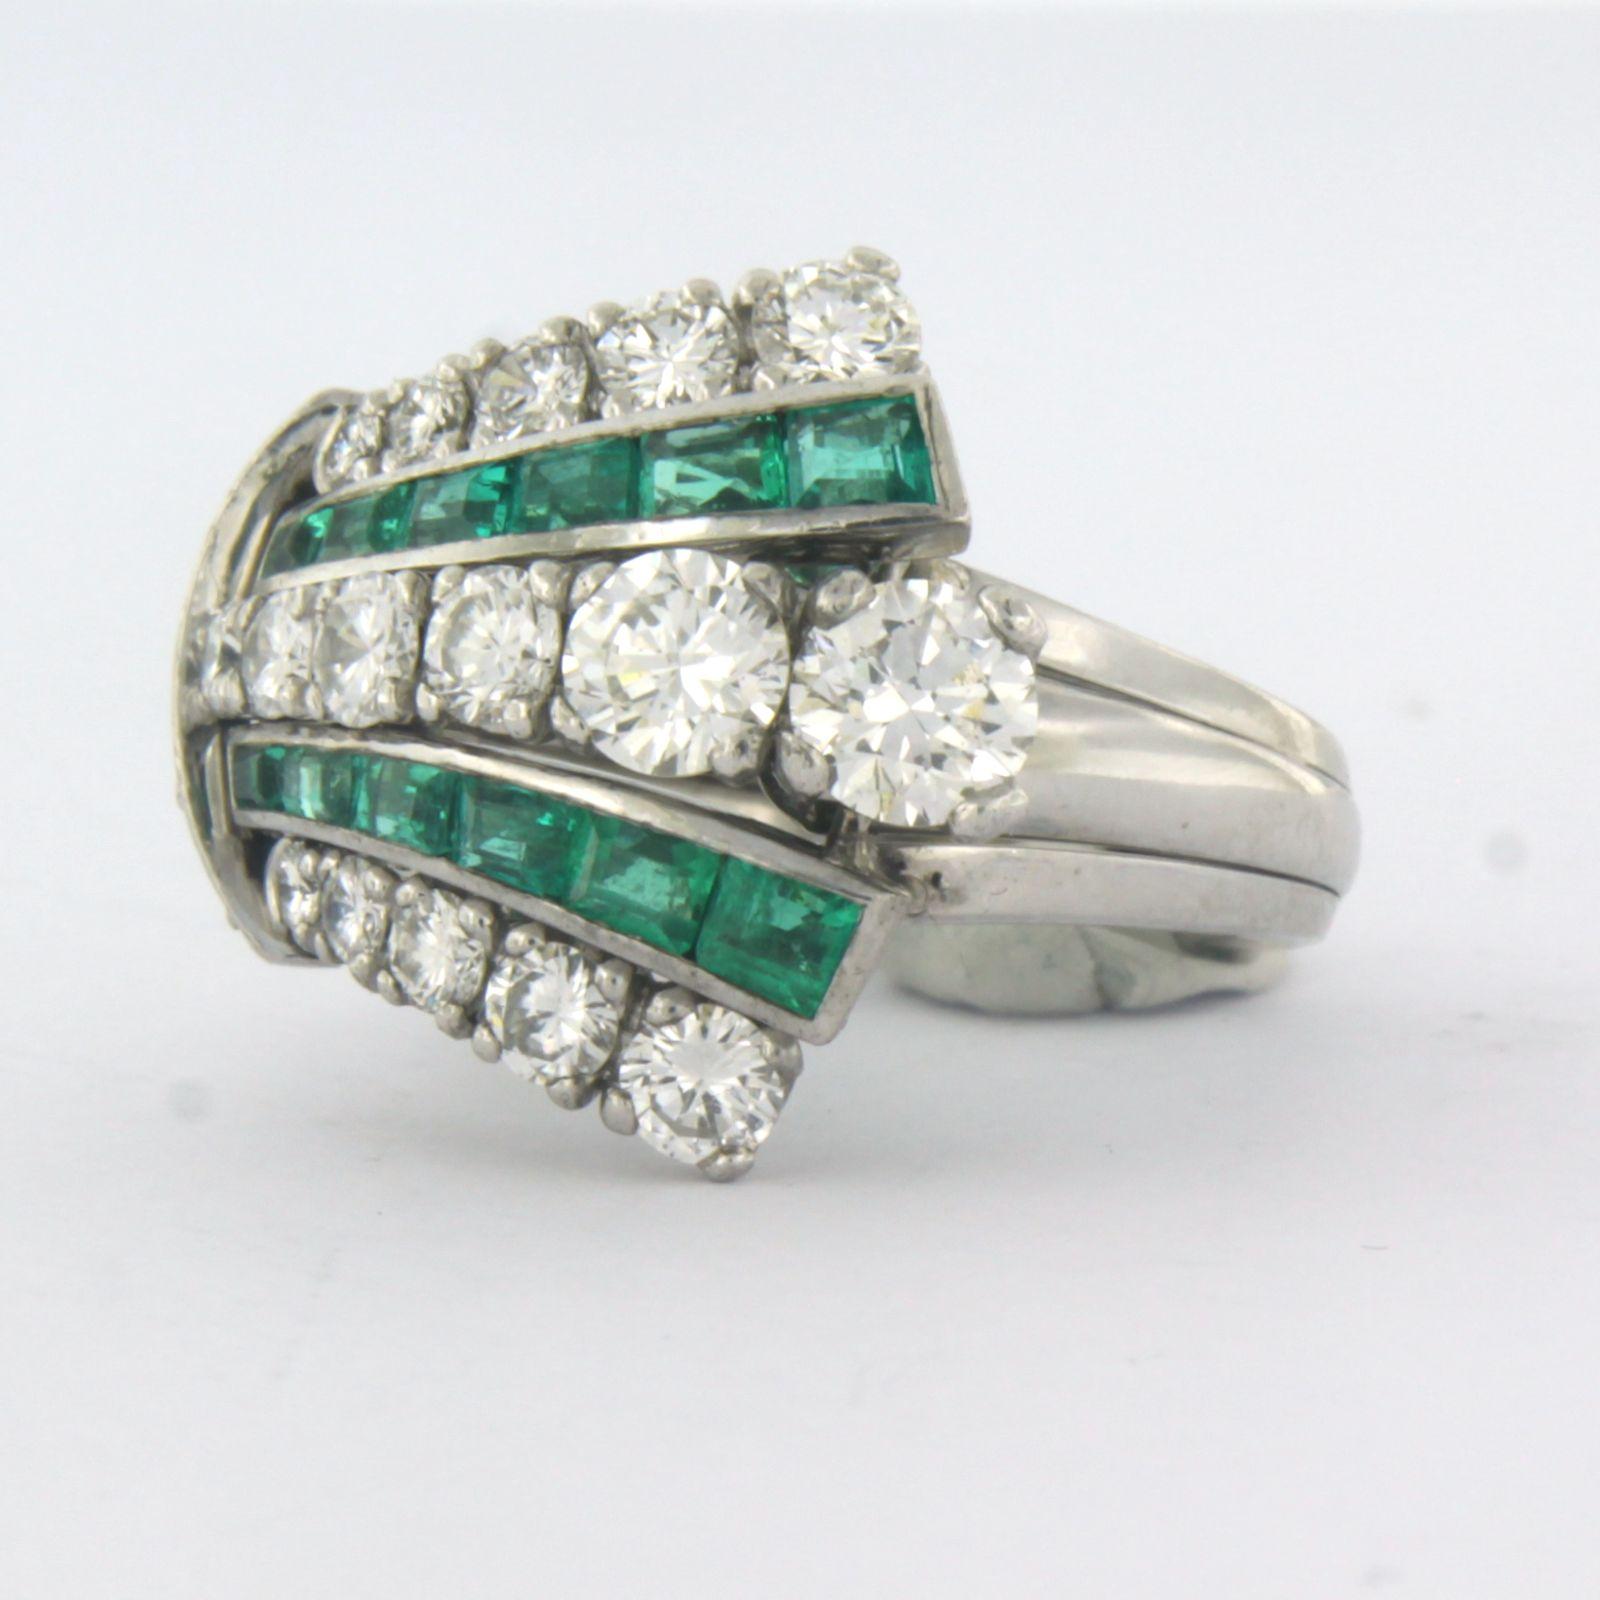 IGI Diamond Report - 18k white gold cocktail ring set with emerald and brilliant cut diamonds. 2.10ct – G, F/G – VS1, SI1, VS/SI - ring size US. 7 – EU 17.25(54)

detailed description:

The top of the ring is 2.0 cm wide by 9.7 mm high

Ring size